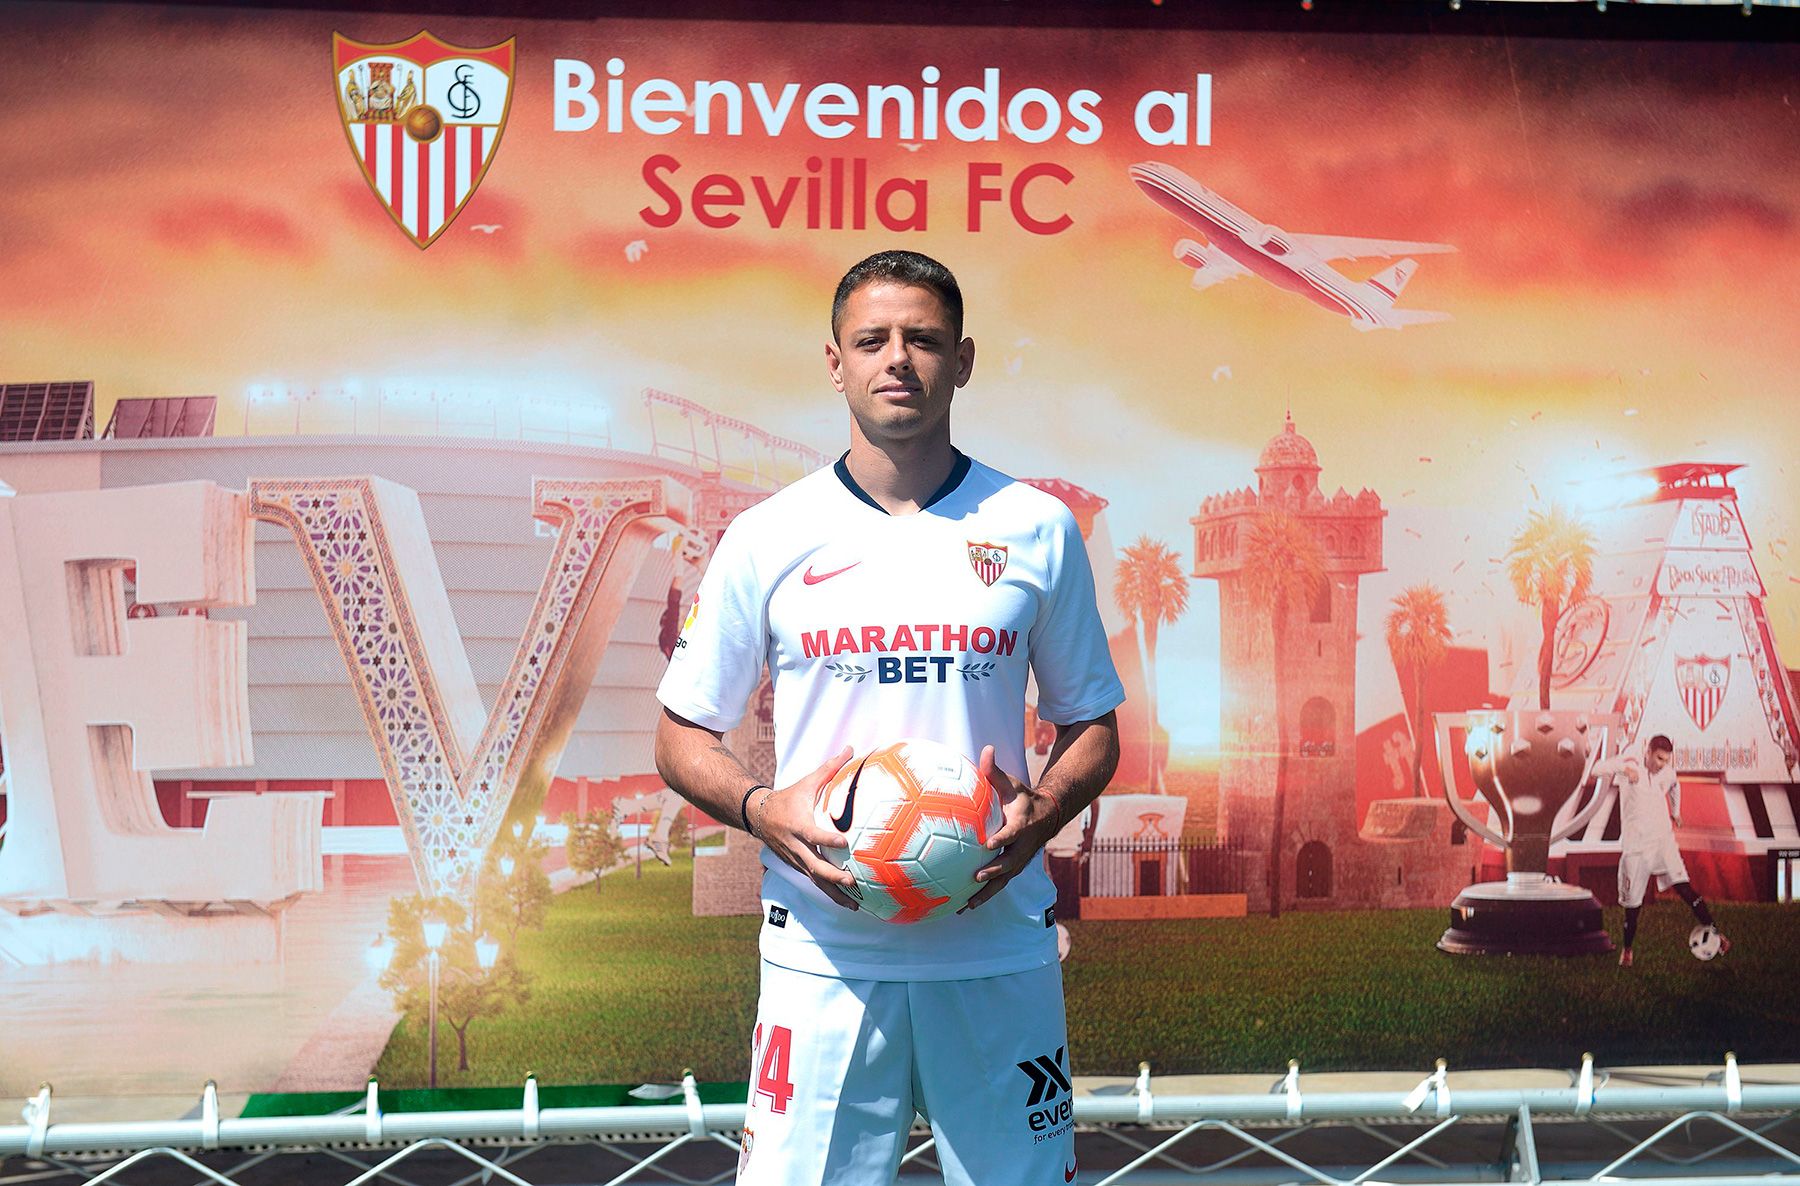 The Chicharito Hernández in his presentation with the Seville